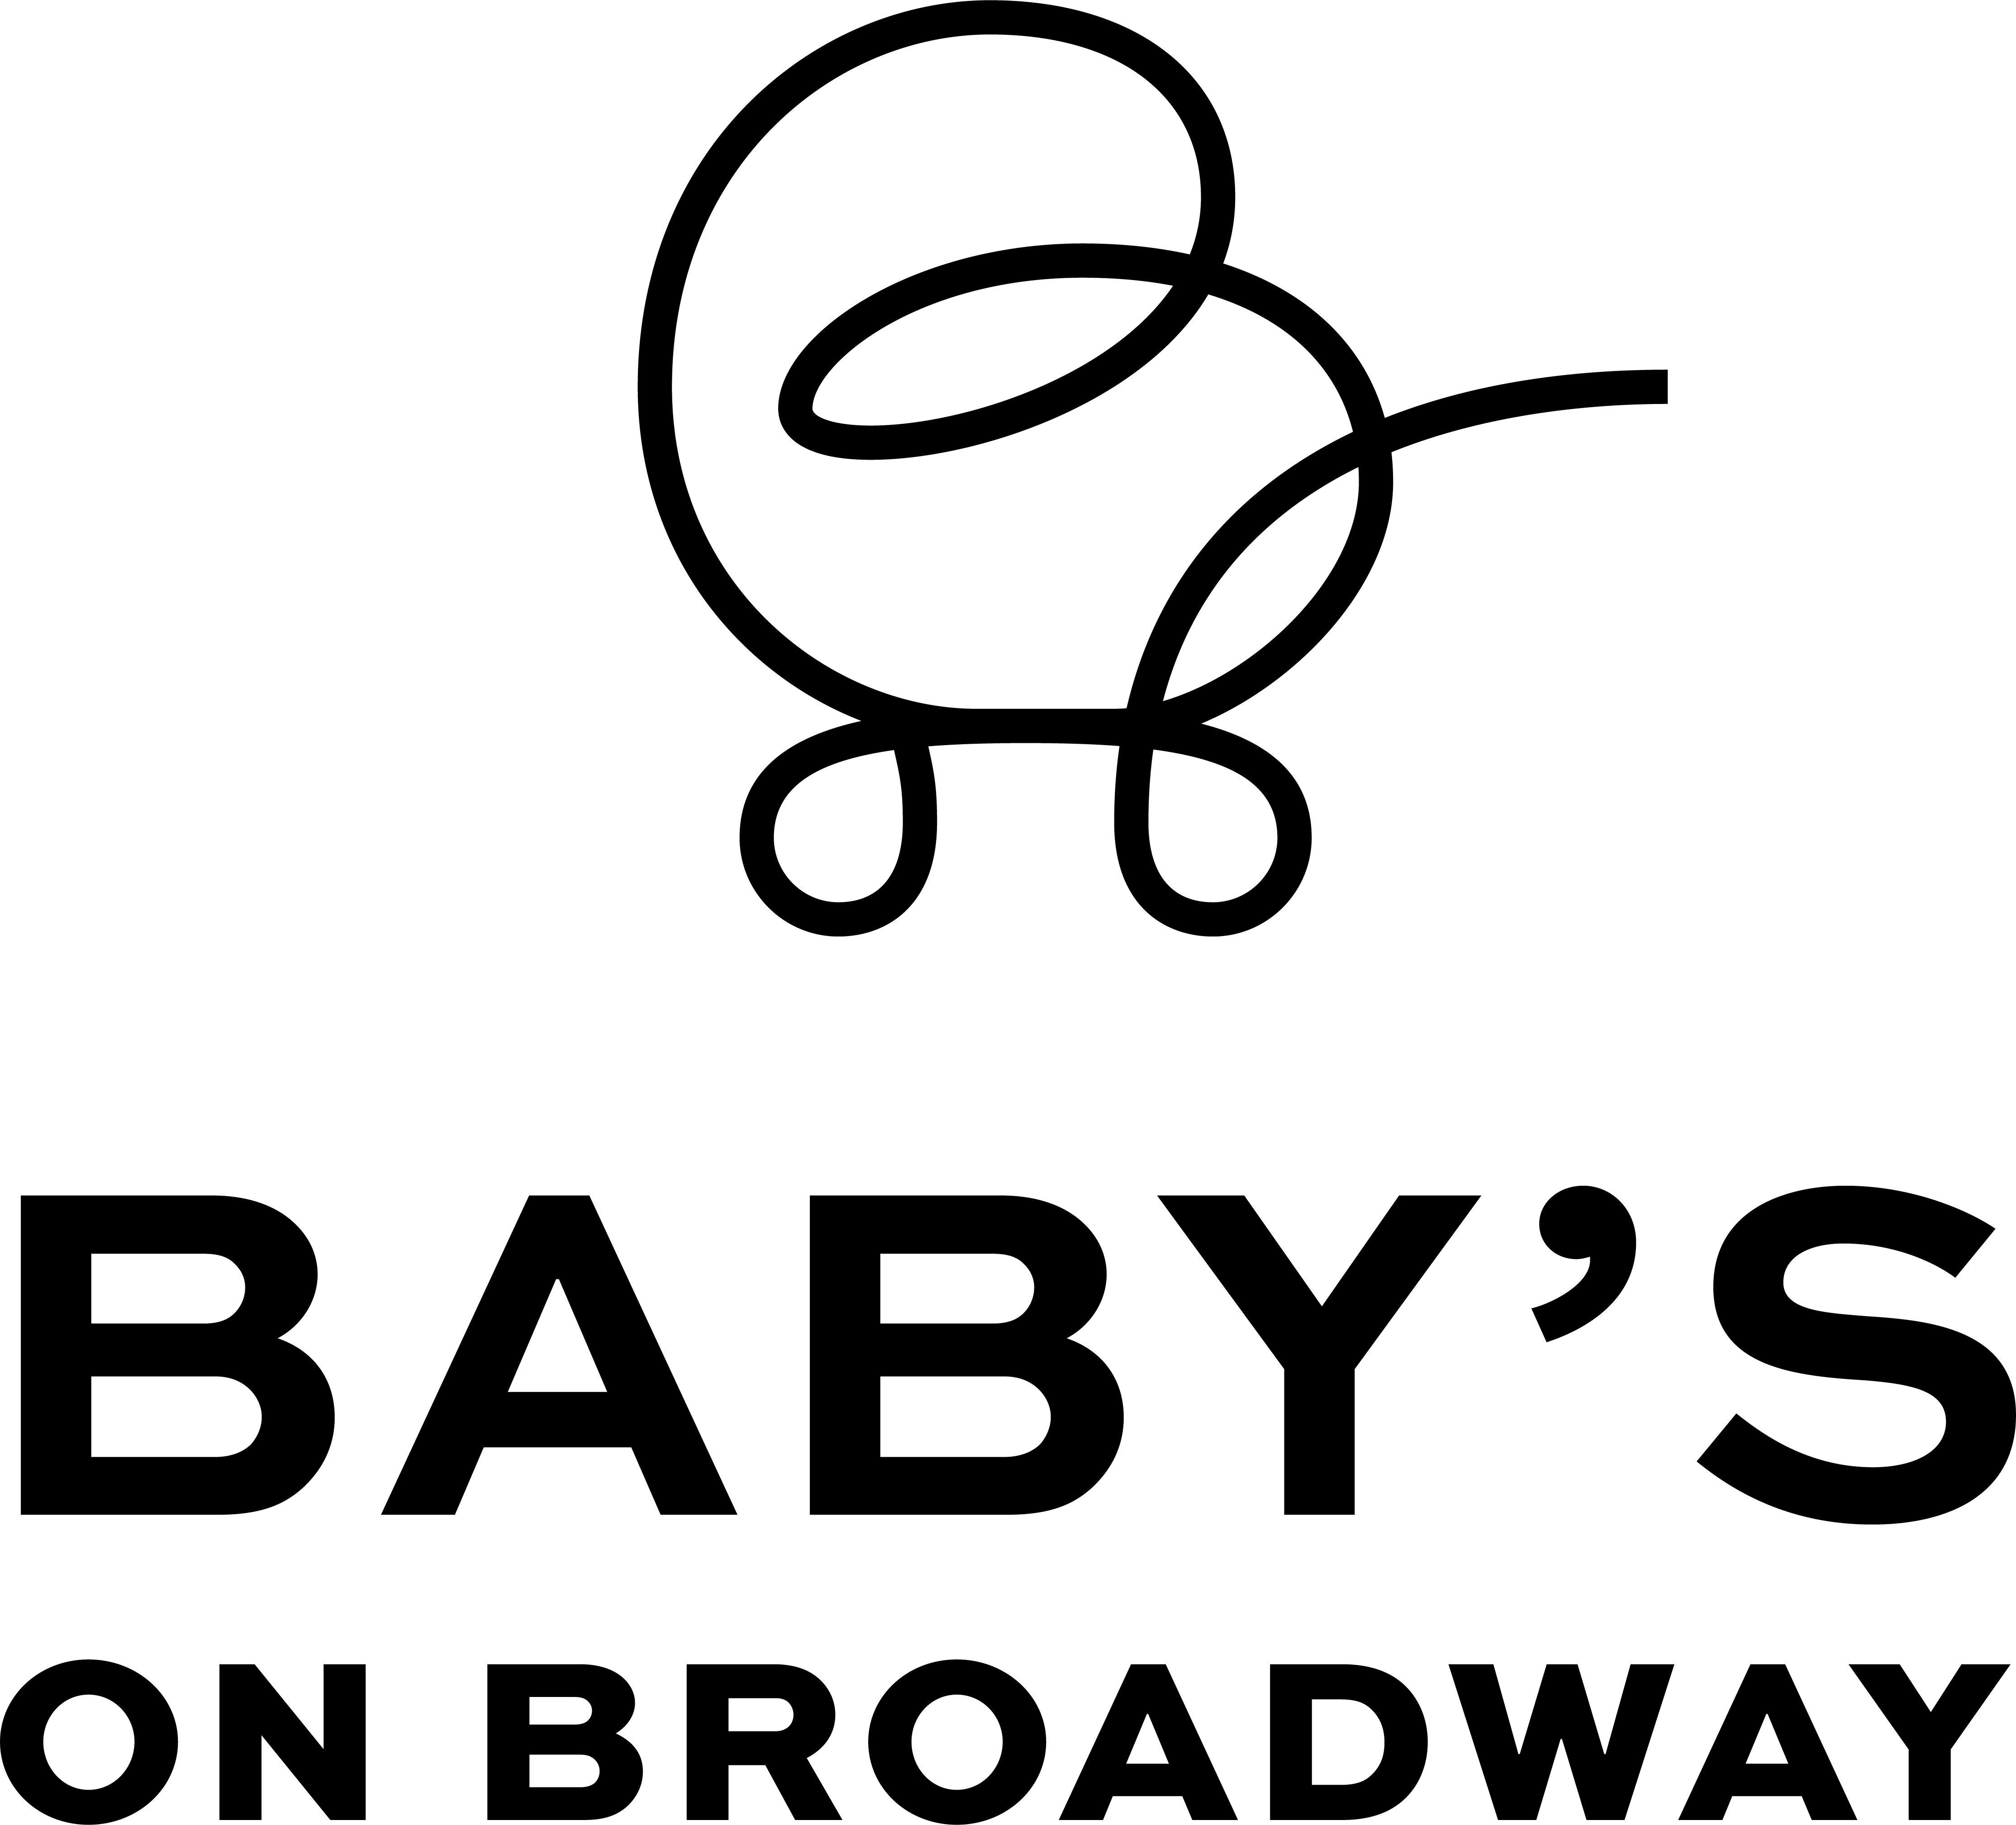 Baby's on Broadway